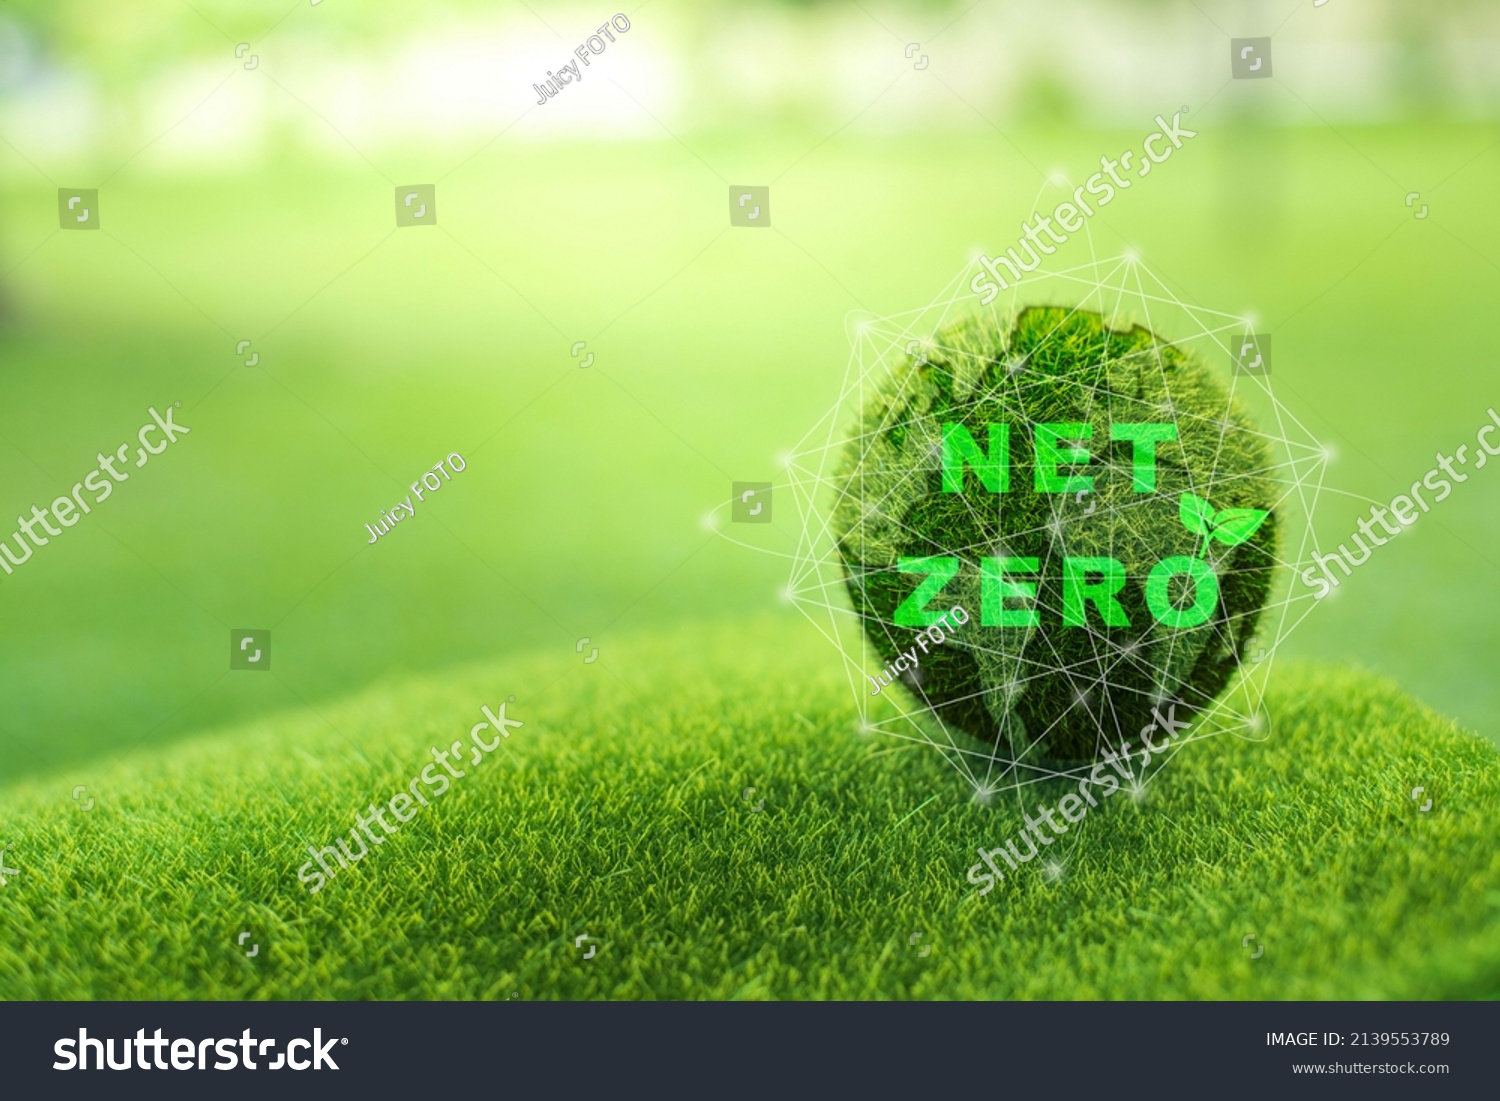 Net-Zero Emission - Carbon Neutrality concept. Close up earth on nature background. Nature Сonservation, Ecology, Social Responsibility and Sustainability. CO2 #2139553789